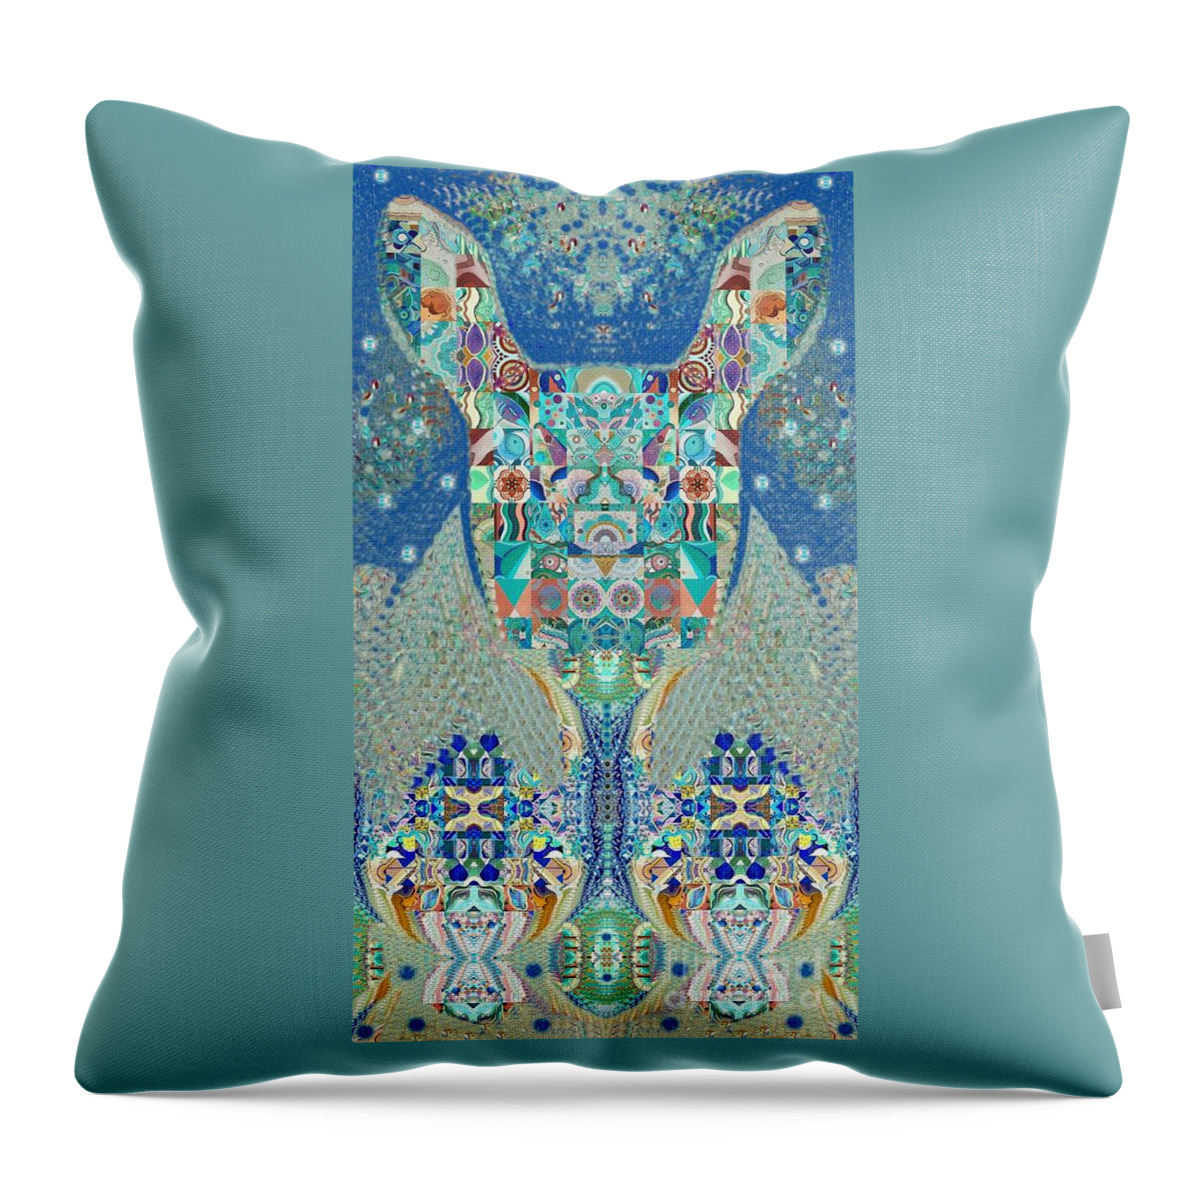 Tjod Wild Hare 2 Full Portrait By Helena Tiainen Throw Pillow featuring the painting TJOD Wild Hare 2 Full Portrait by Helena Tiainen